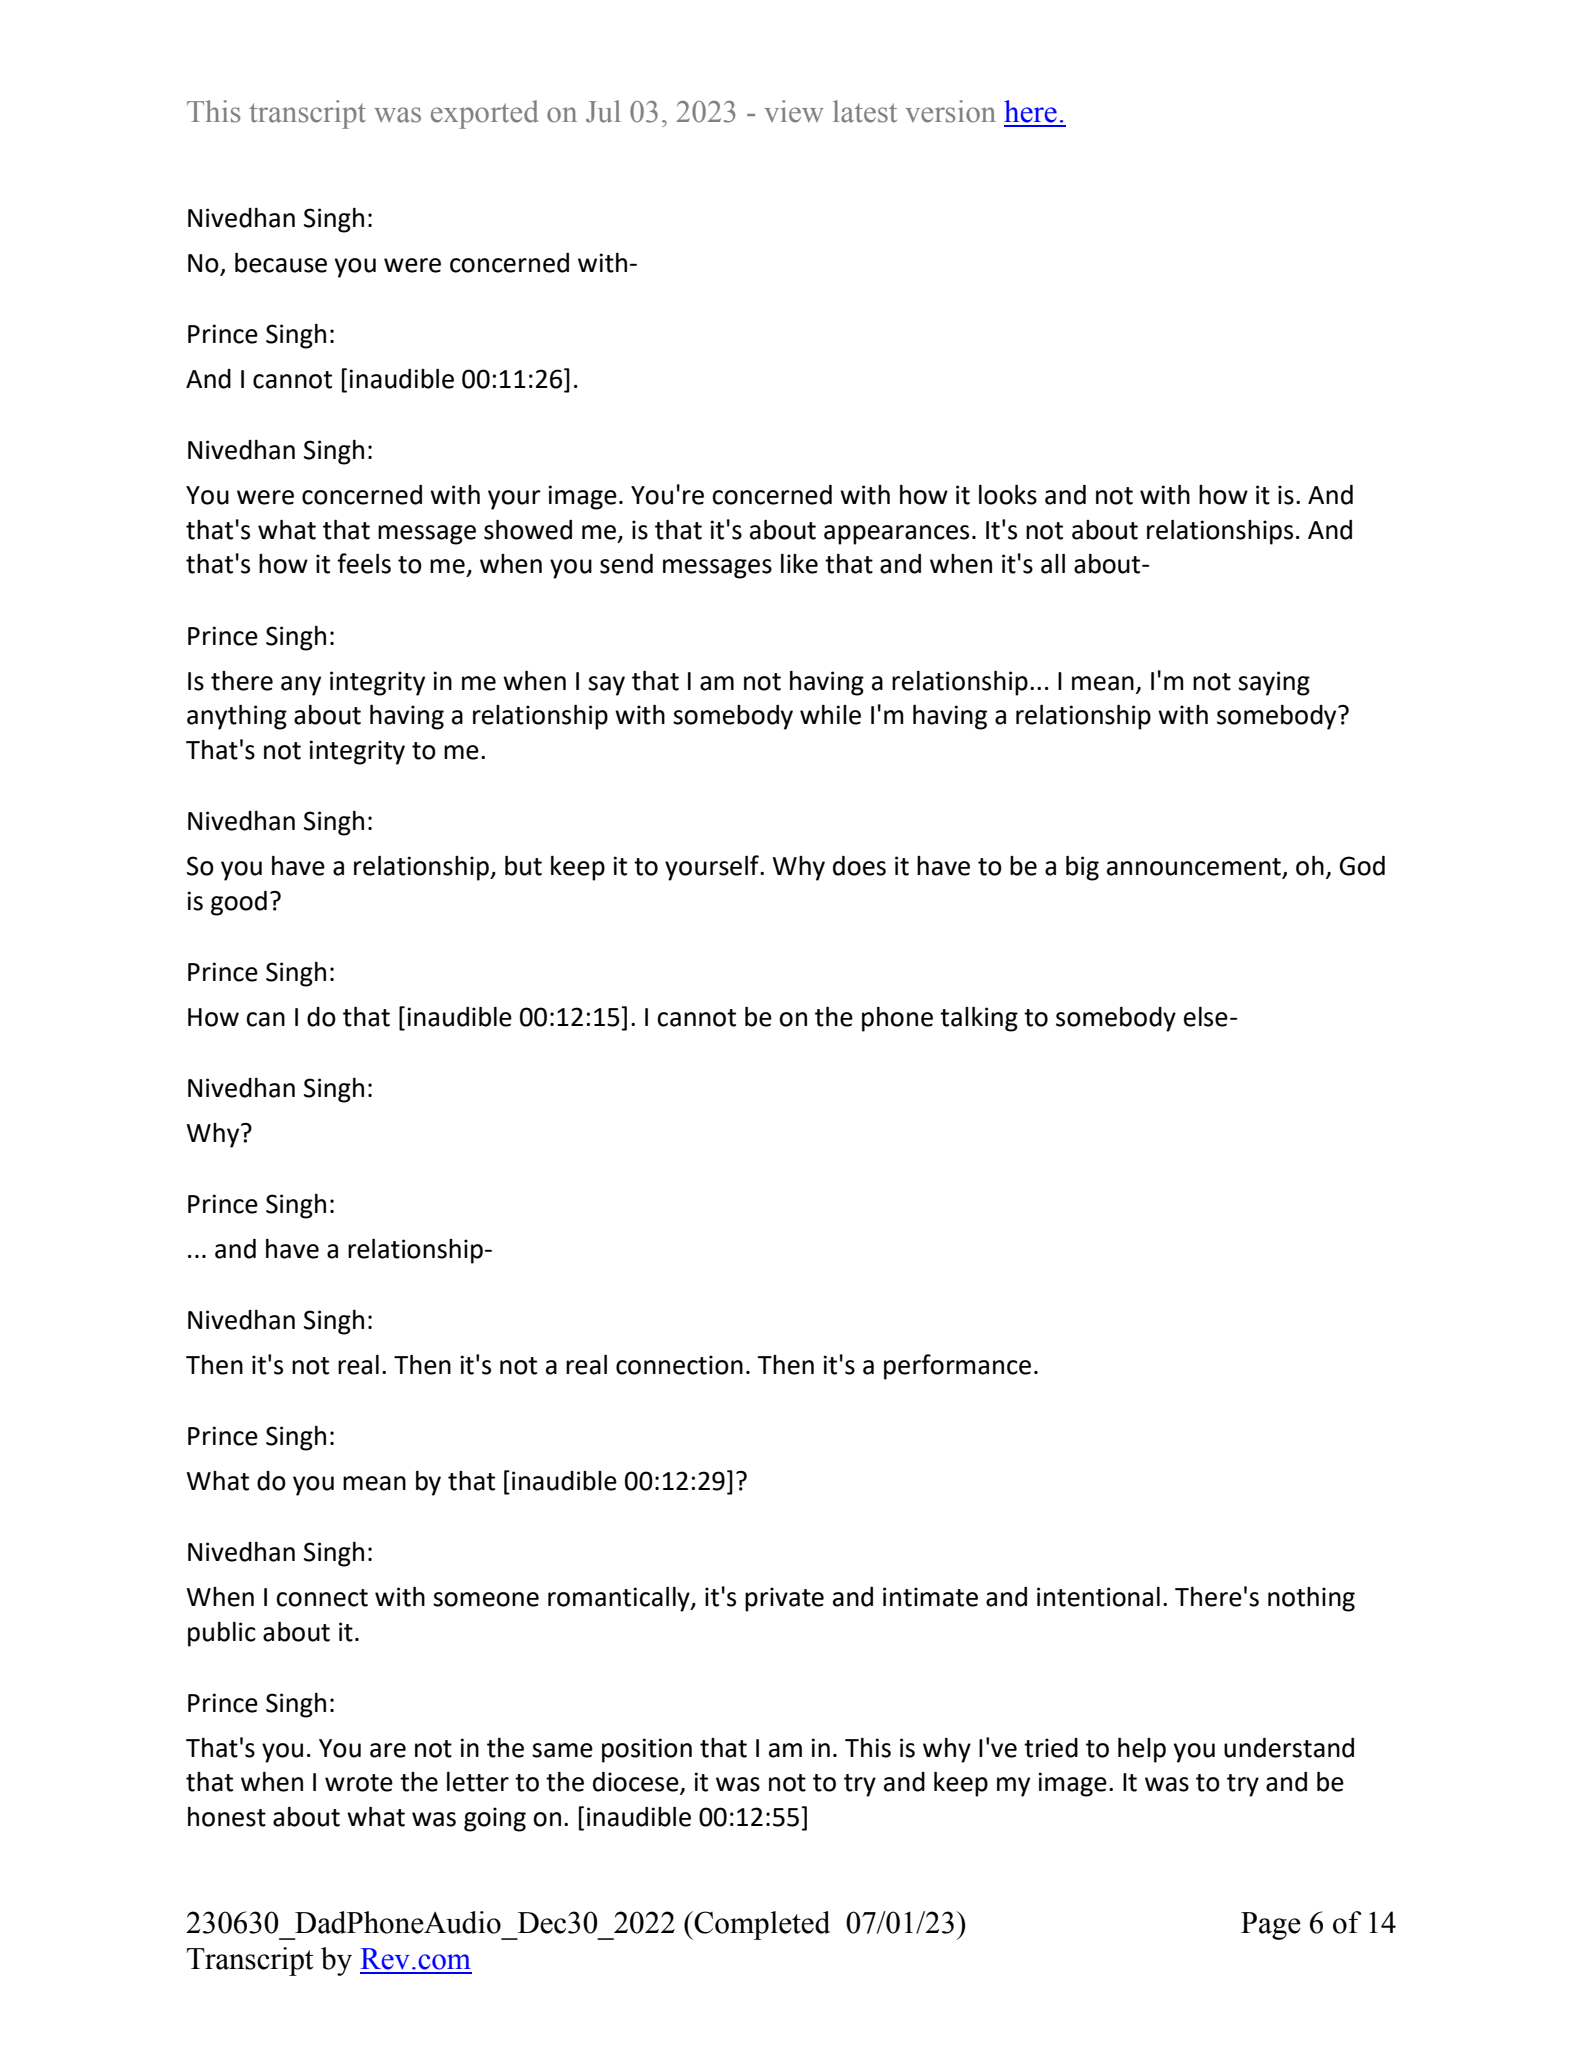 December 30th, 2022 phone call transcript - Page 6